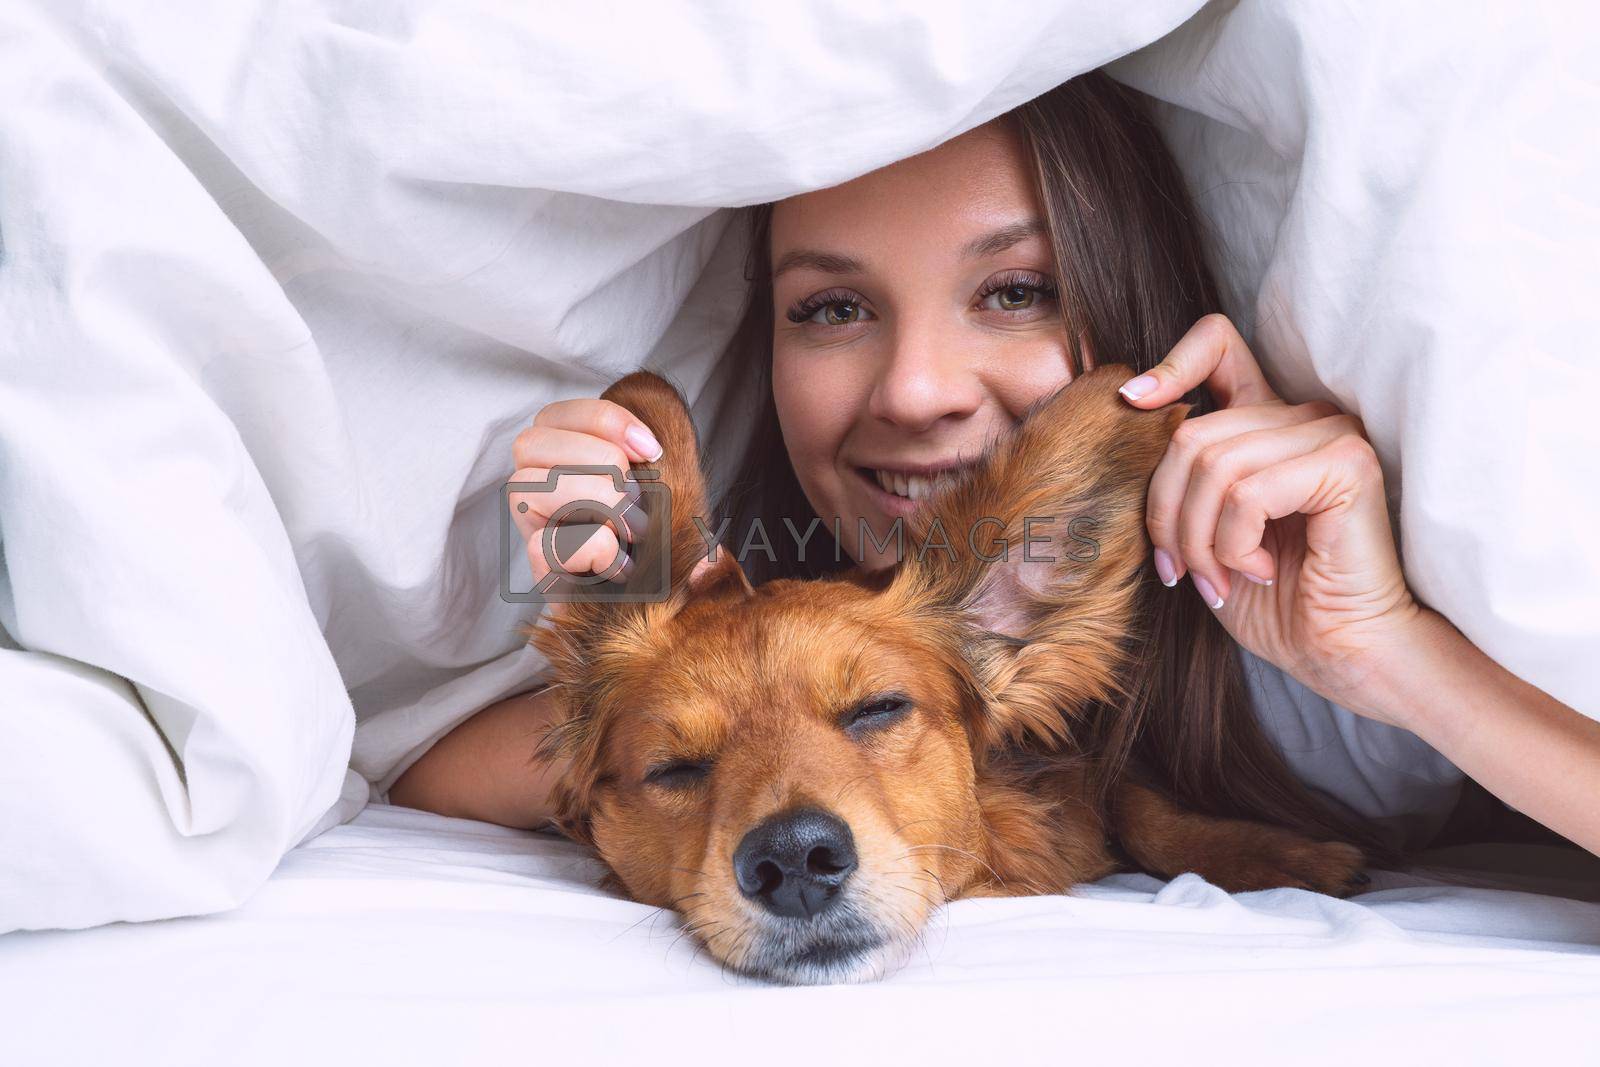 Royalty free image of Beautiful woman with funny long haired dachshund dog lying under the blanket in the bed. Dog and owner friendship by DariaKulkova